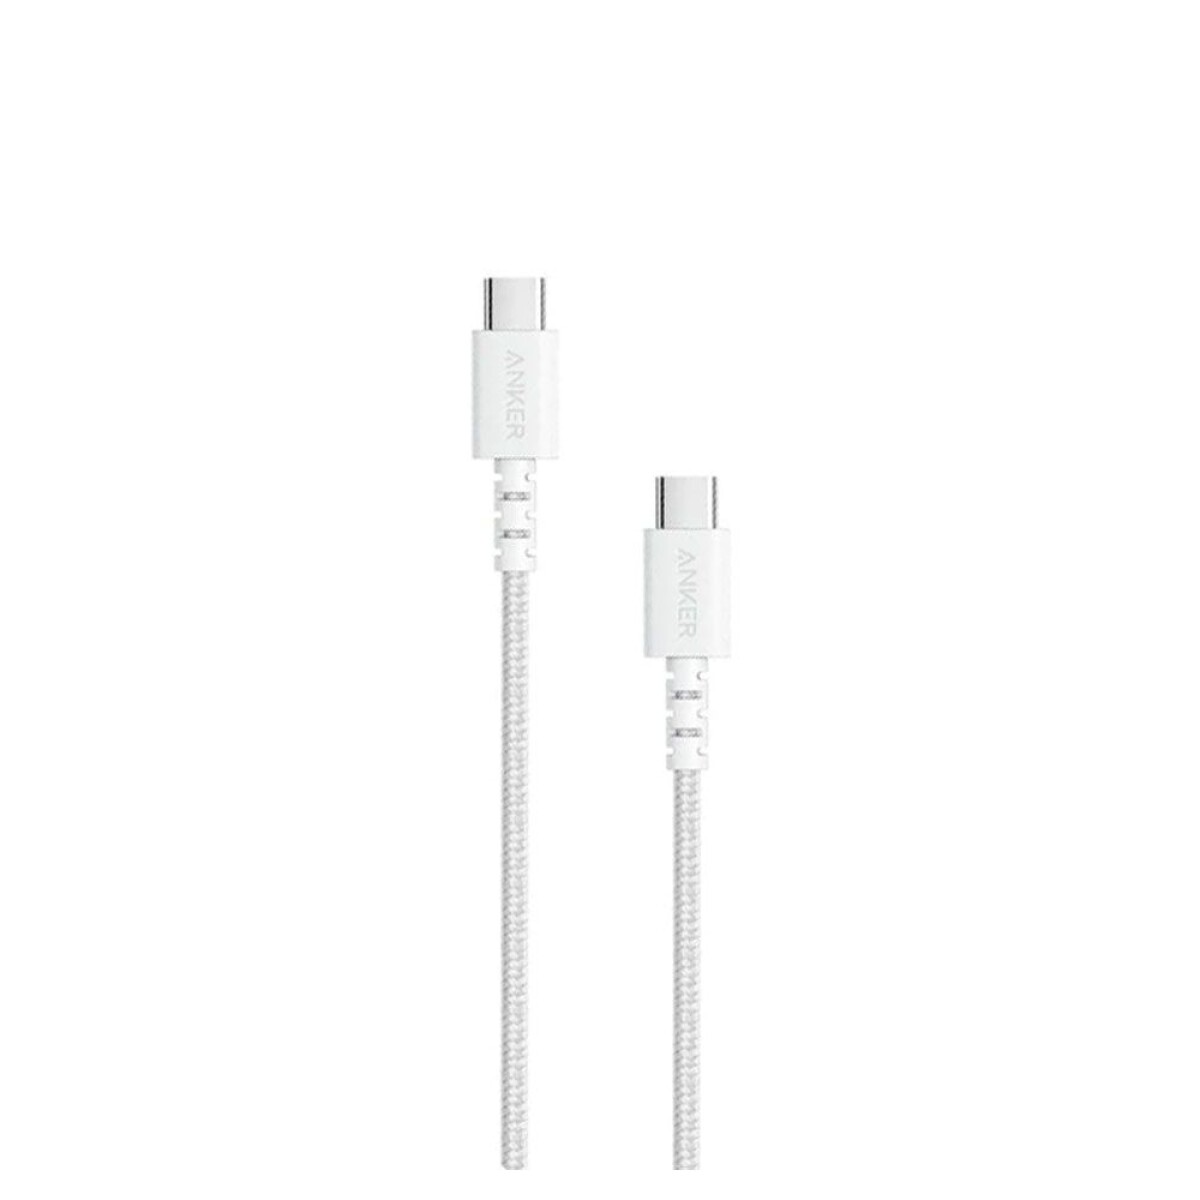 Cable PowerLine Select+ USB-C to USB-C 1.8m (6ft) White 